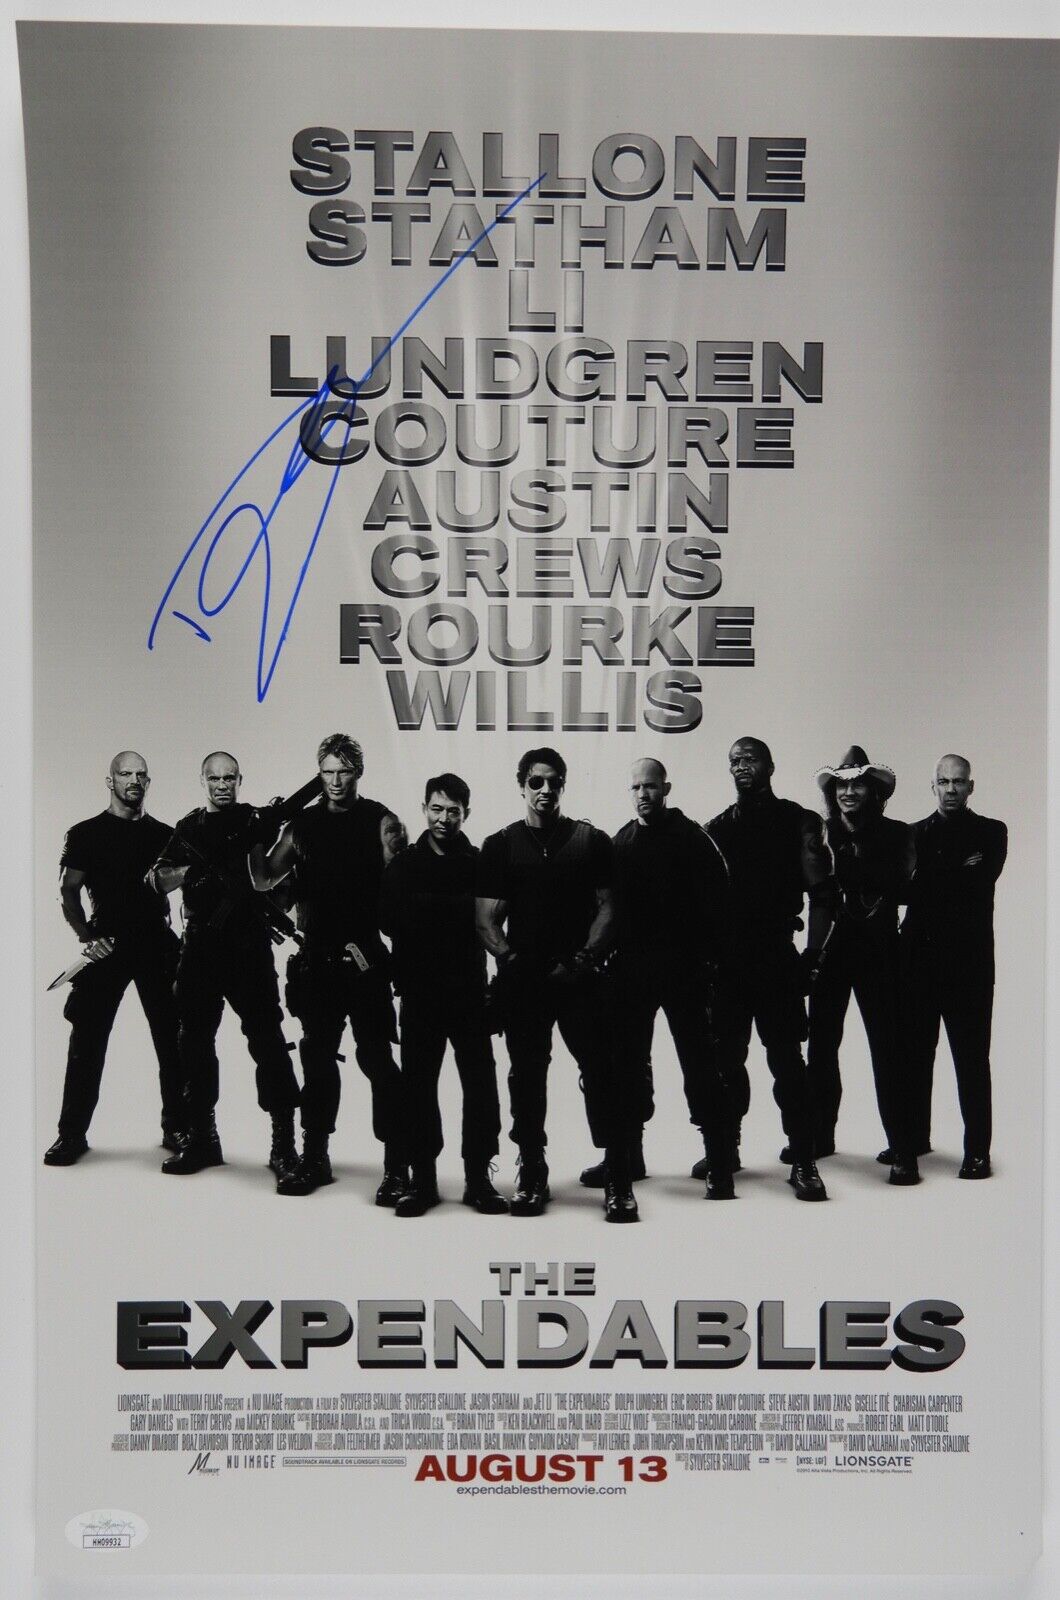 Dolph Lundgren The Expendables Autograph JSA 12 x 18 Signed Photo Poster painting